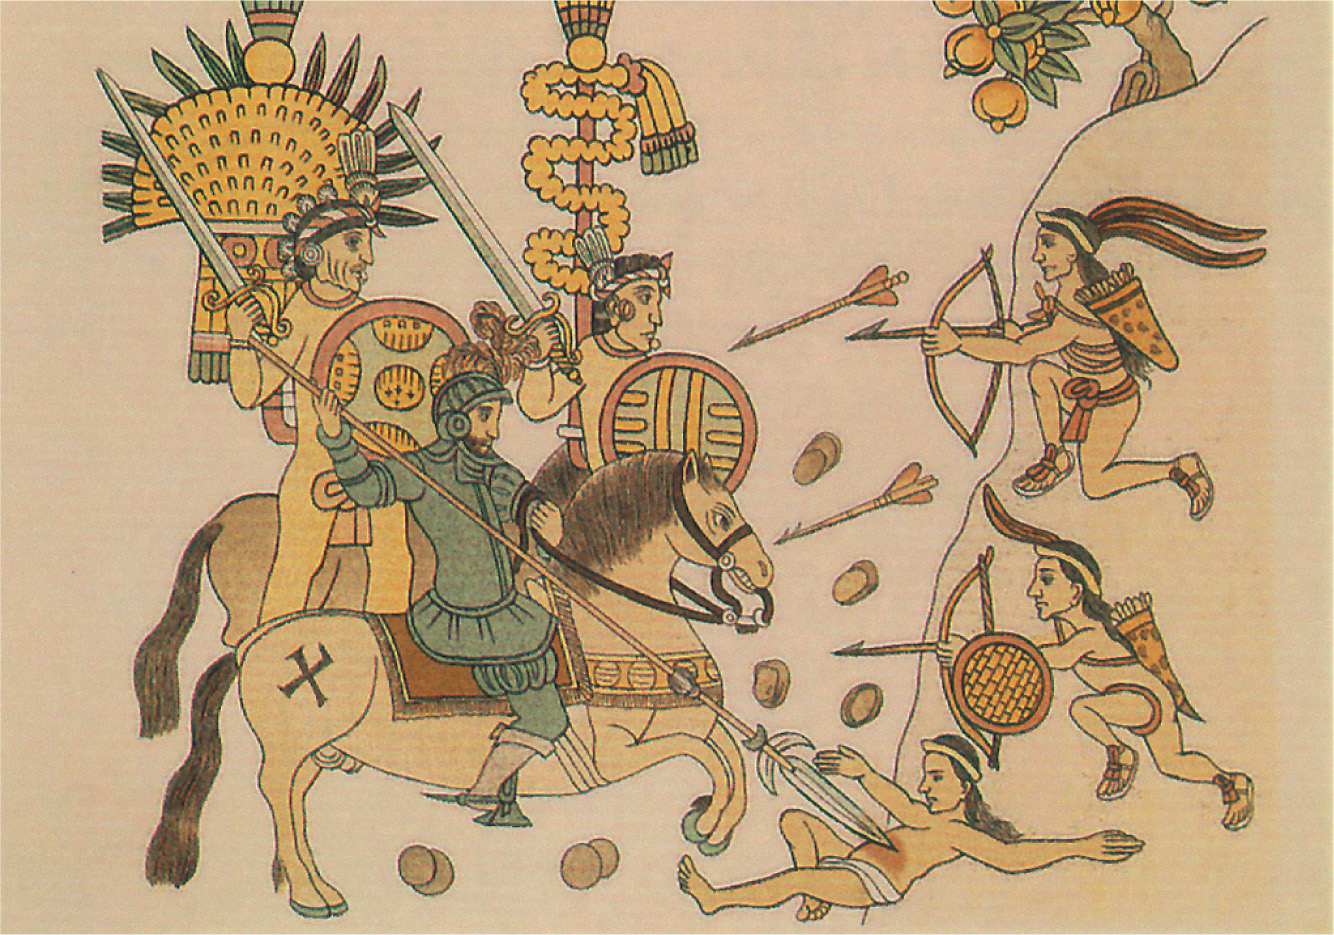 Painting: A conquistador stabs an Aztec warrior with a spear. Other Aztecs fire arrows.